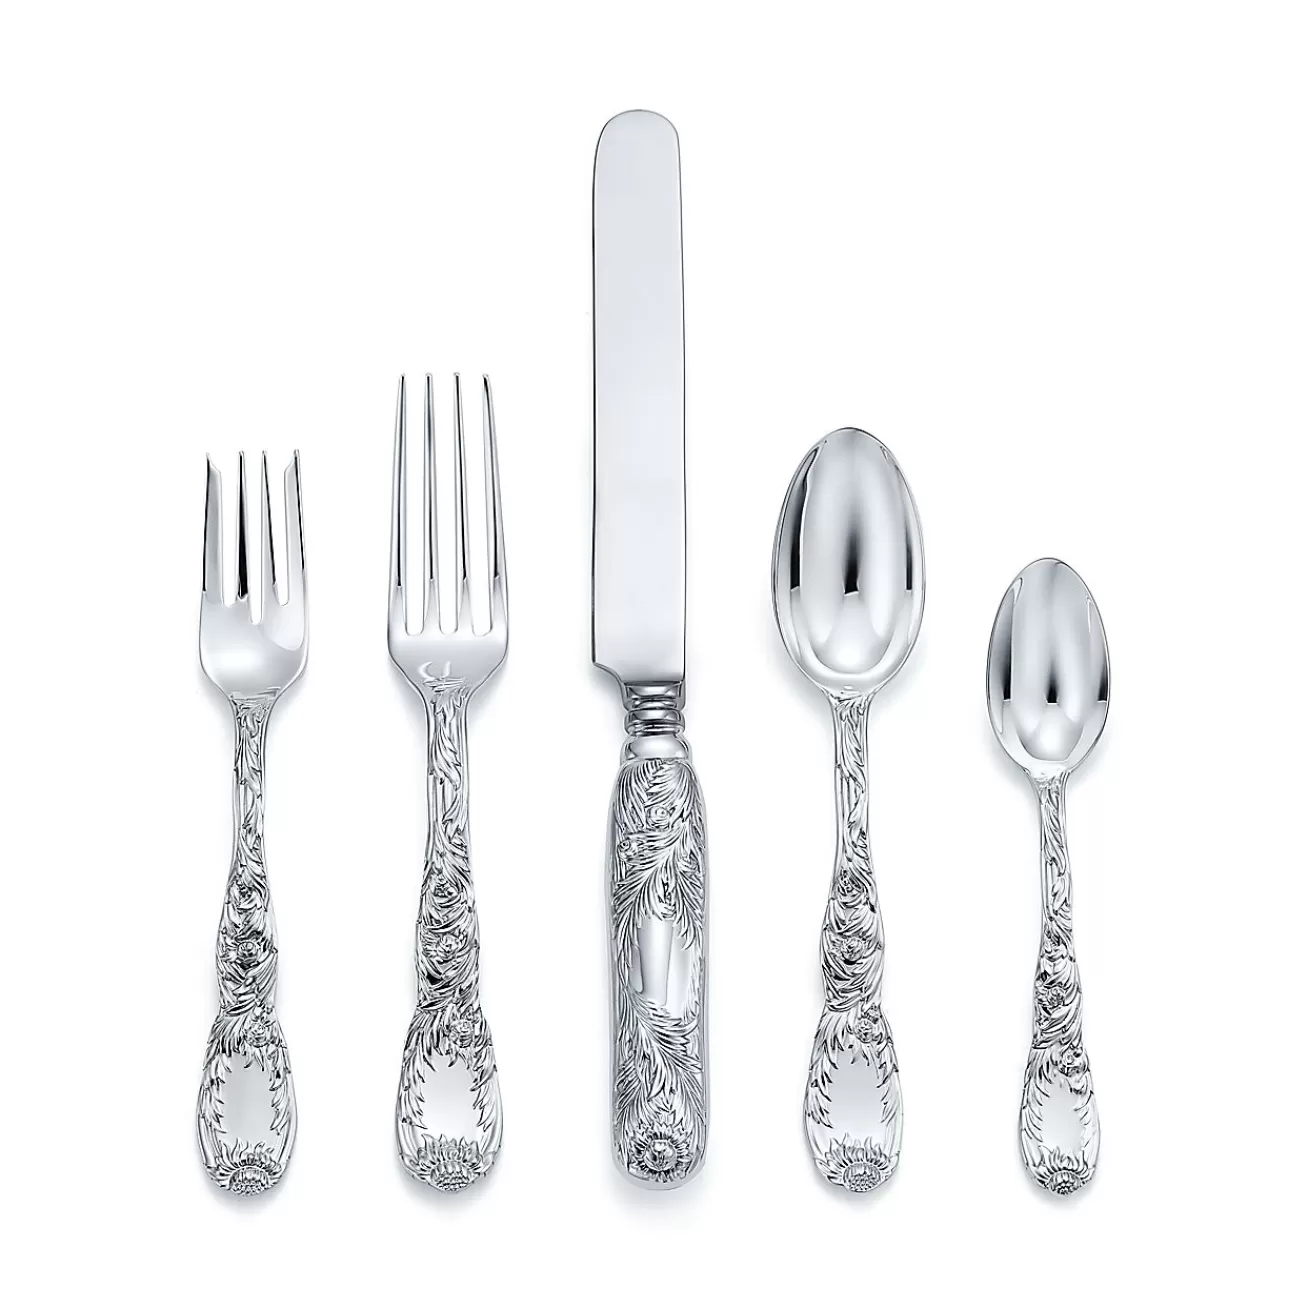 Tiffany & Co. Chrysanthemum five-piece flatware set in sterling silver. | ^ The Couple | Wedding Gifts